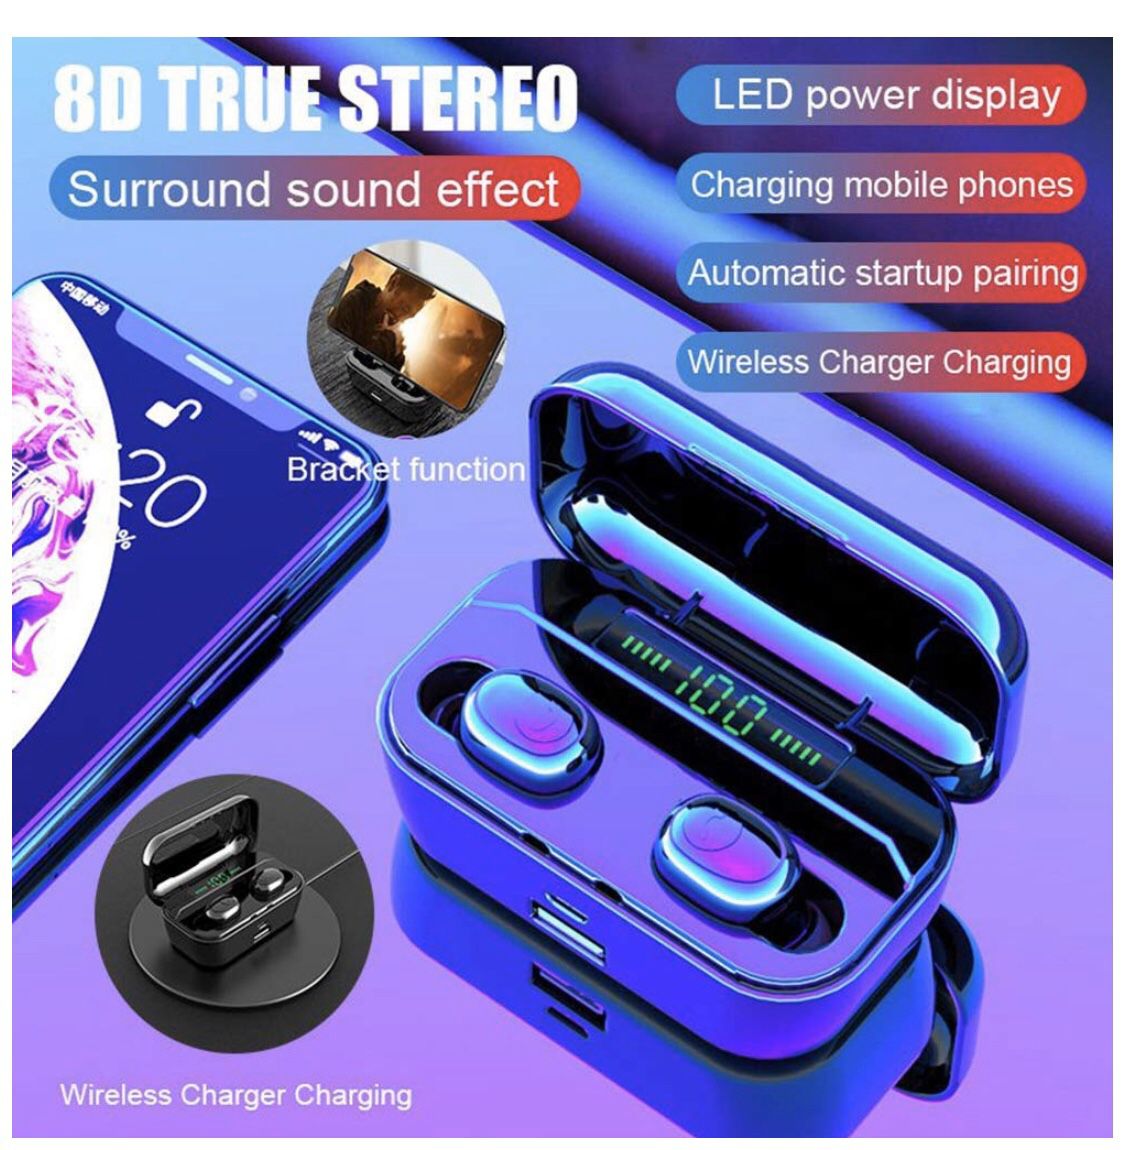 Wireless Earbuds Bluetooth 5.0 TWS Earphones with 3500mAh Wireless Charging Case IPX7 Noise Cancelling Headphones 8D Stereo in-Ear Headphones Compati